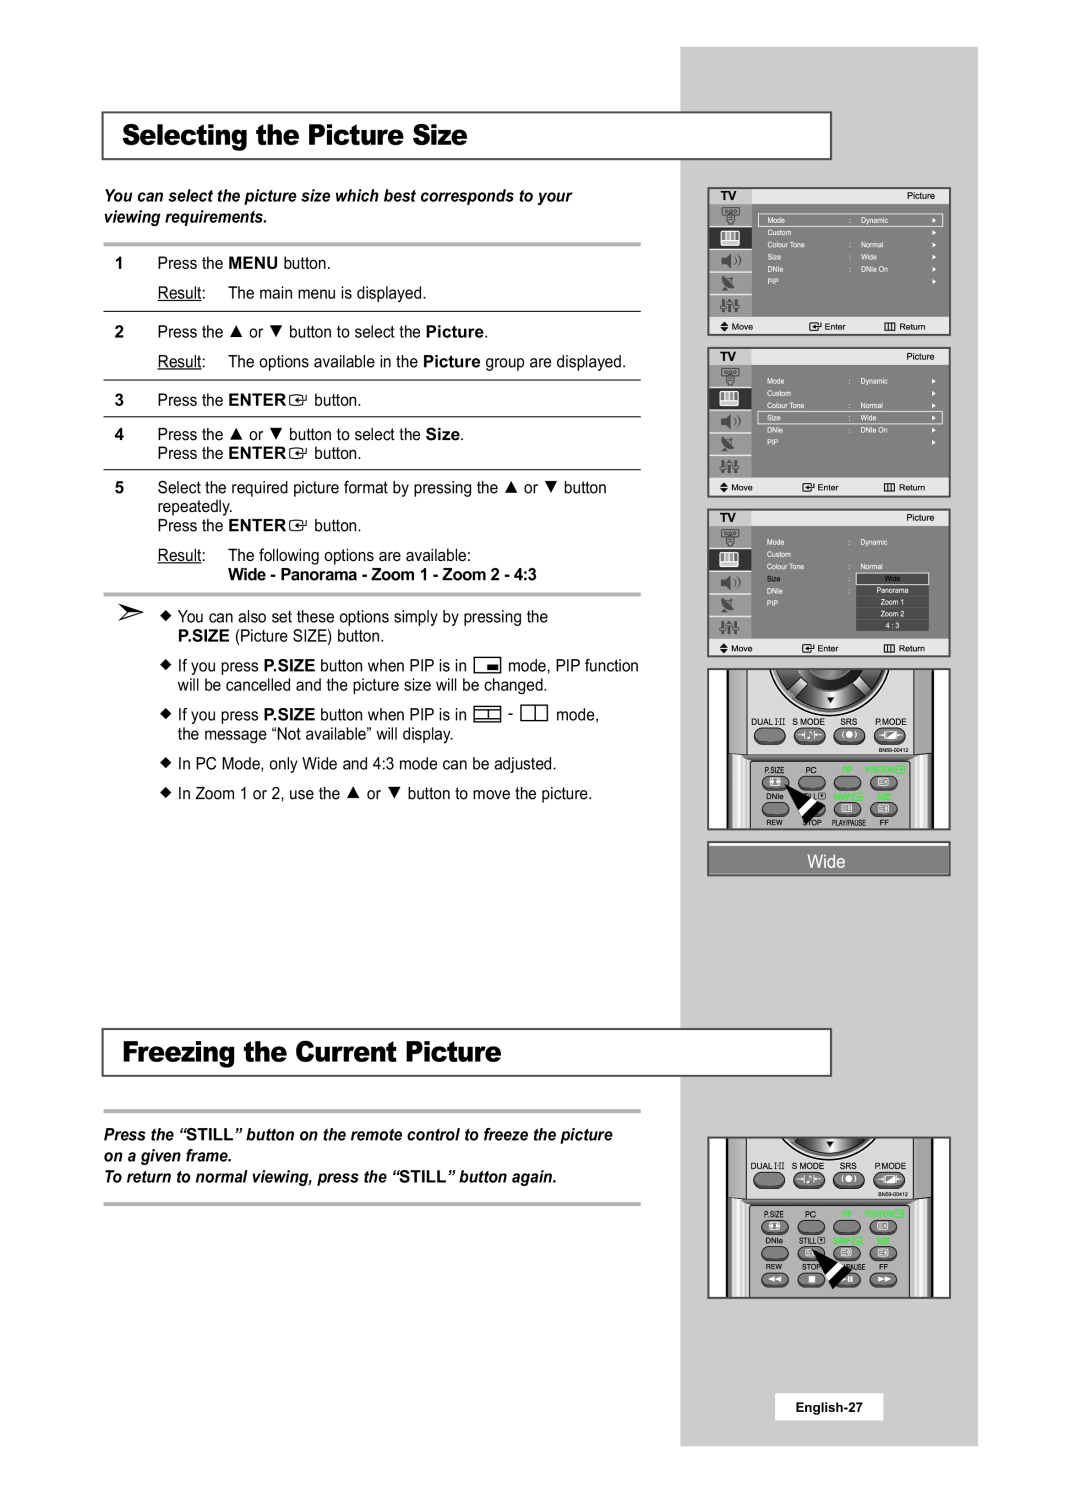 Samsung LA22N21B manual Selecting the Picture Size, Freezing the Current Picture, Wide - Panorama - Zoom 1 - Zoom 2 